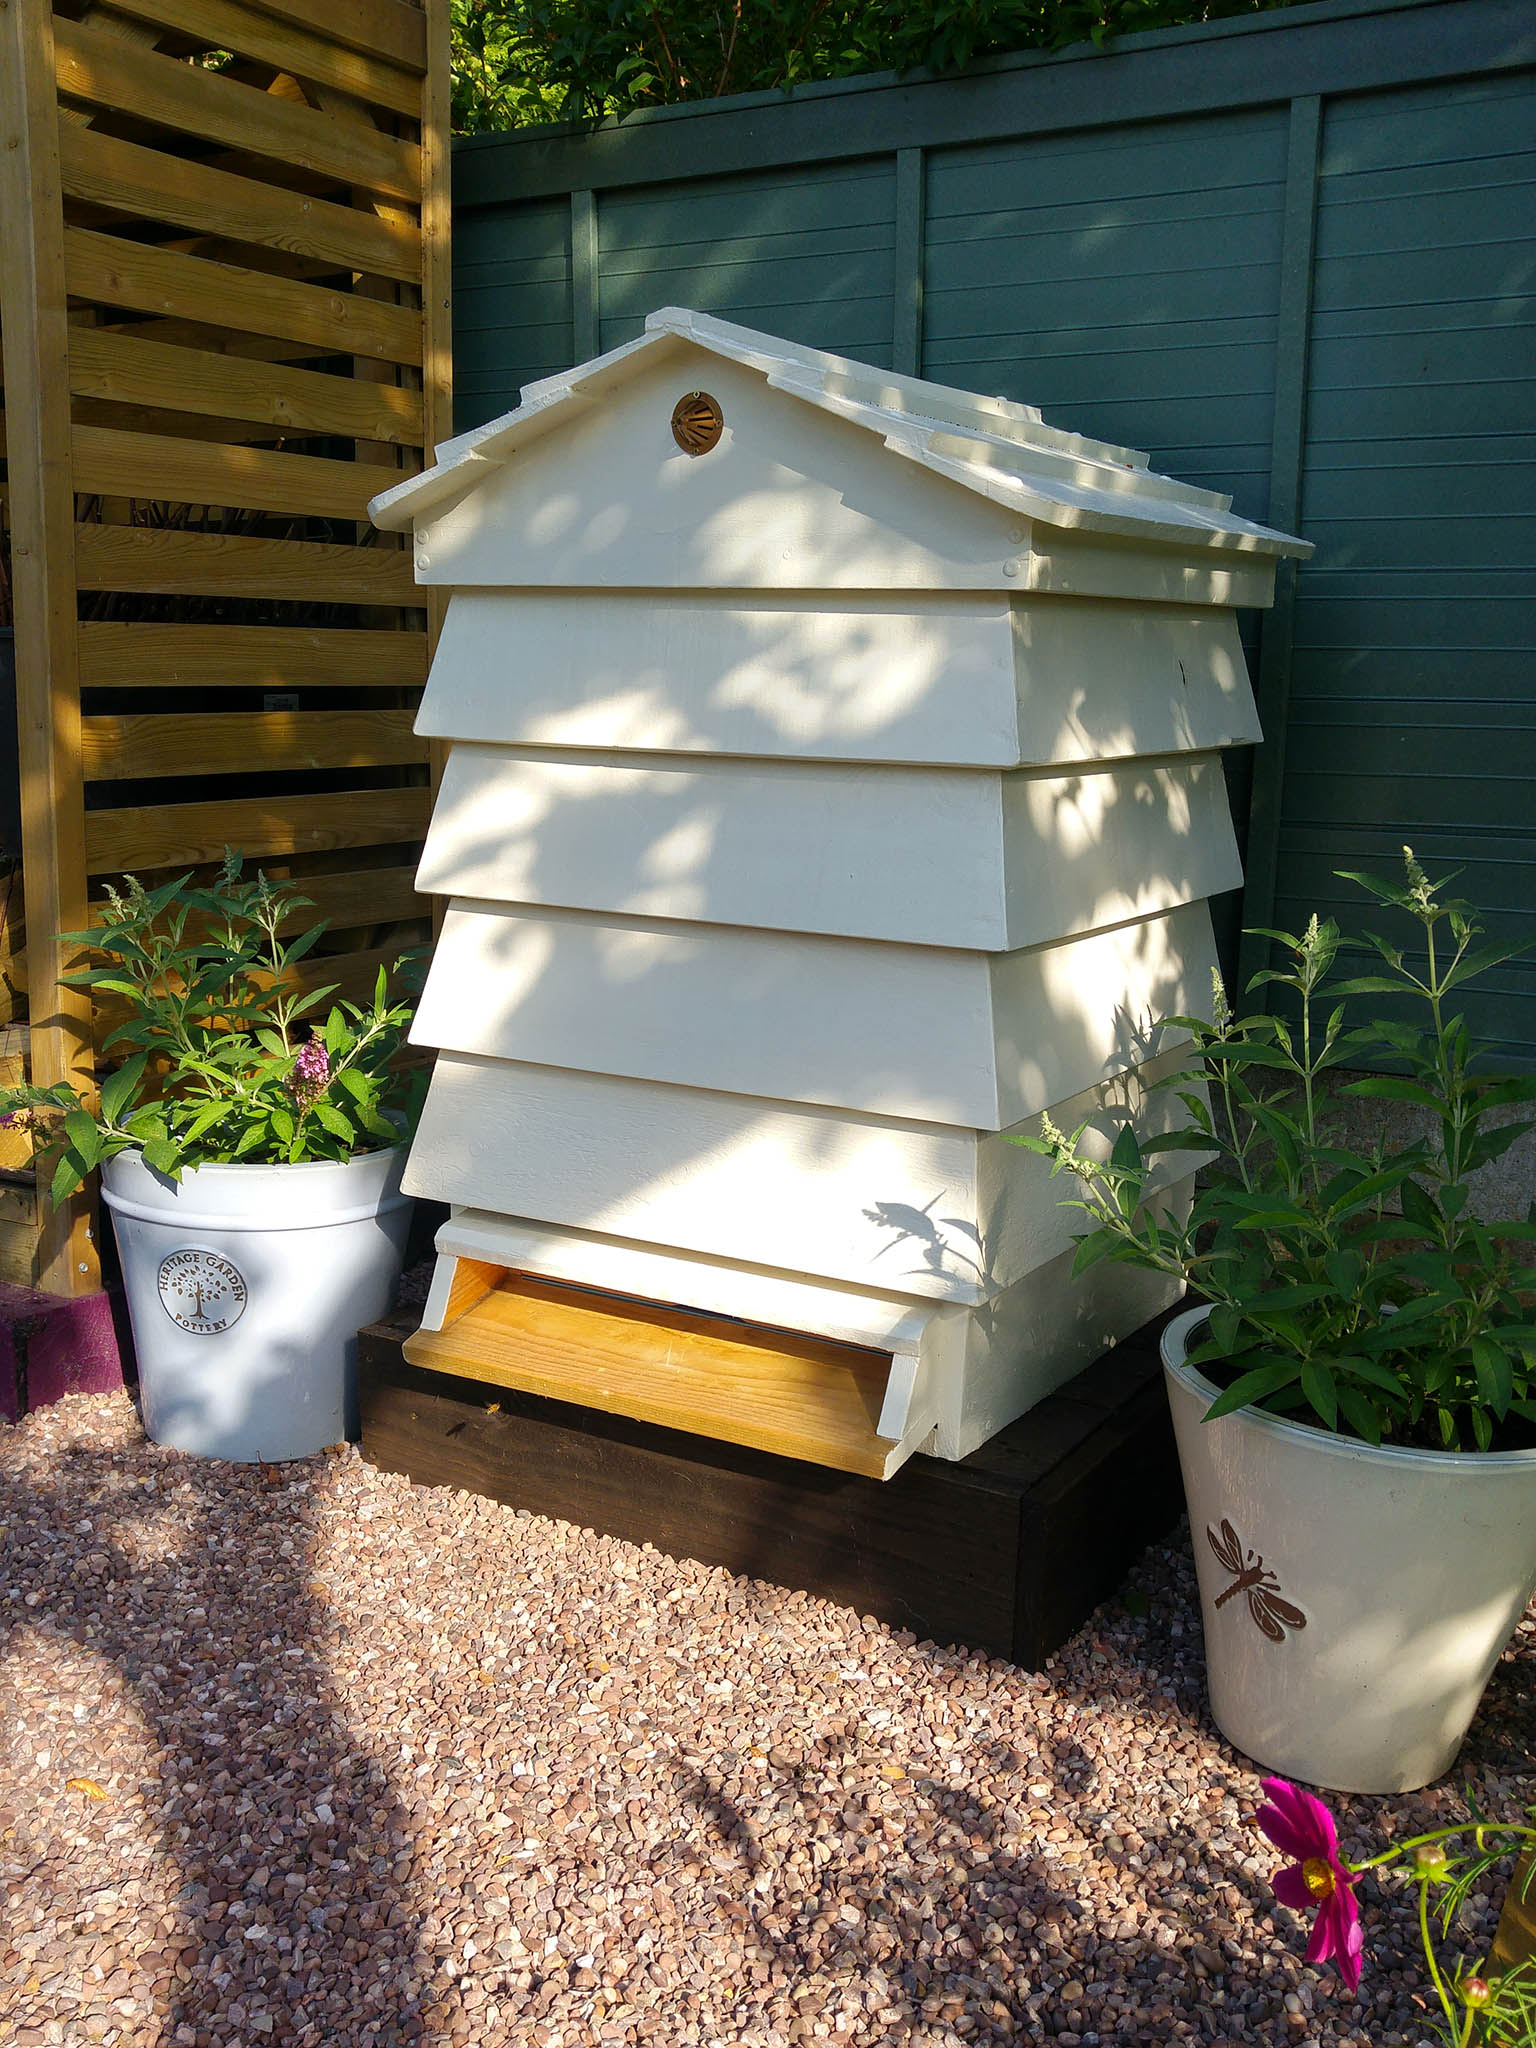 ‘Apart from anything else, the hive is a lovely addition to the garden’